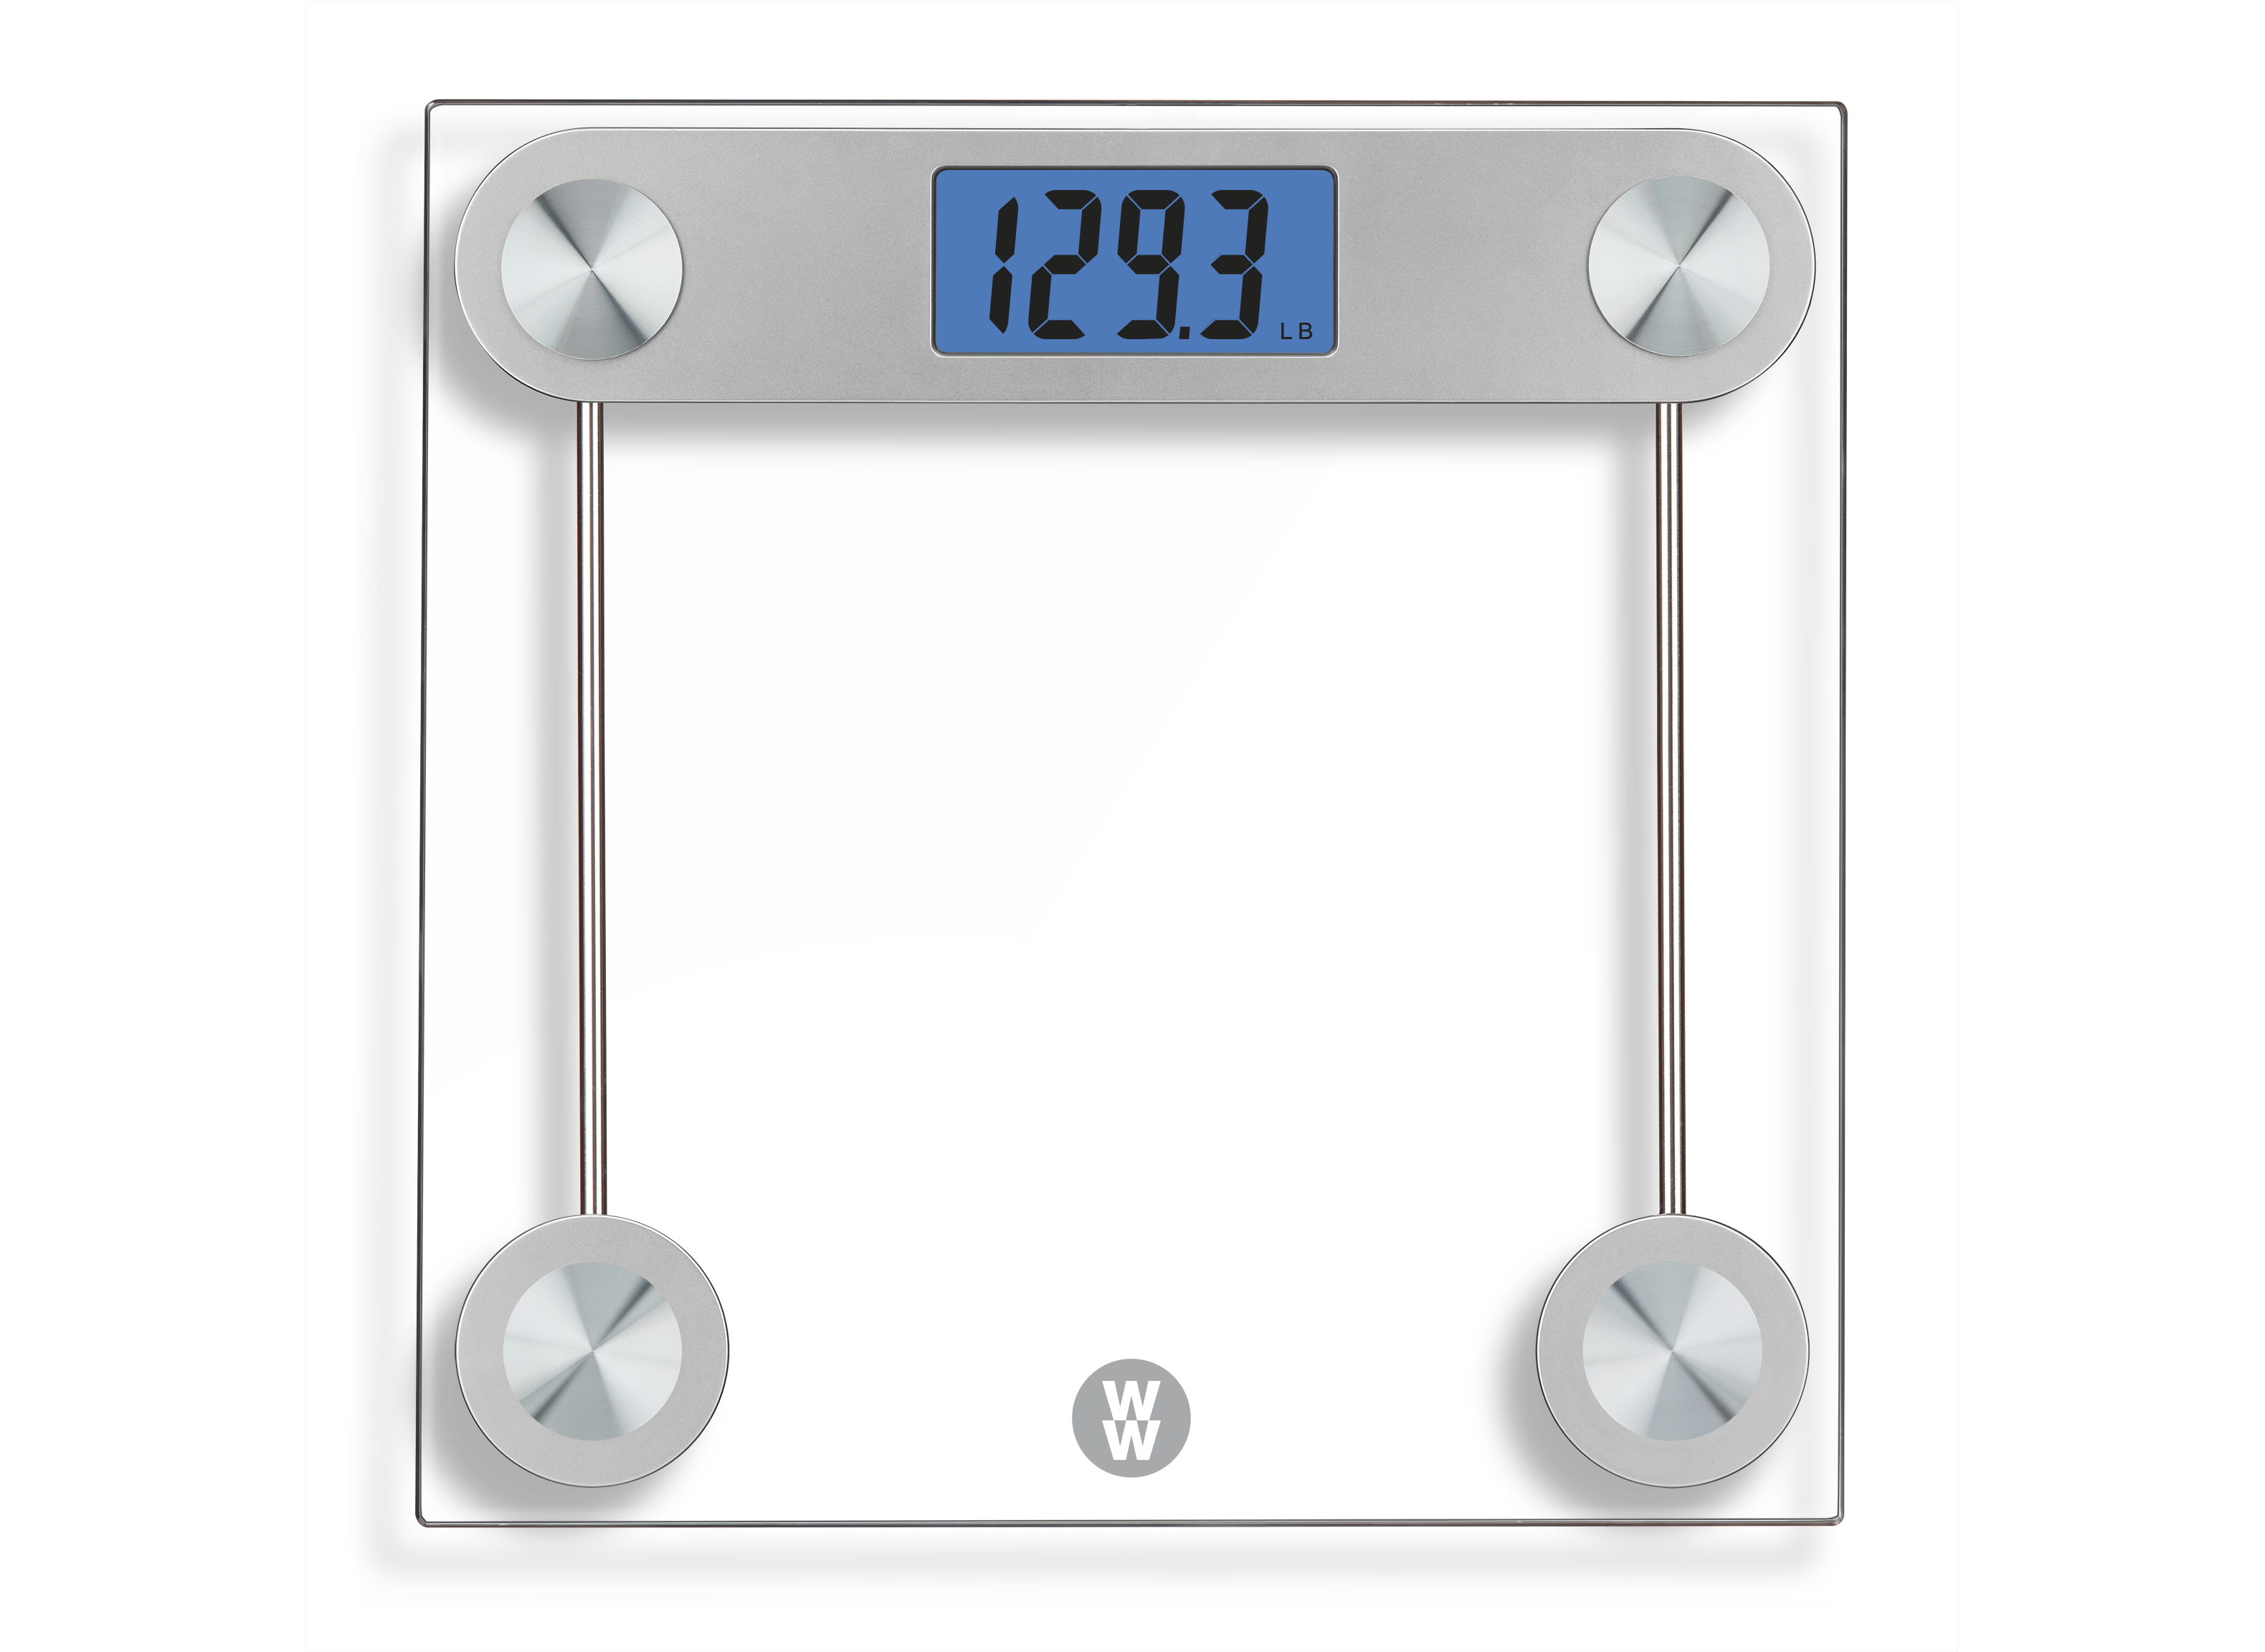 https://crdms.images.consumerreports.org/prod/products/cr/models/402928-digital-scales-ww-ww26-10017592.png